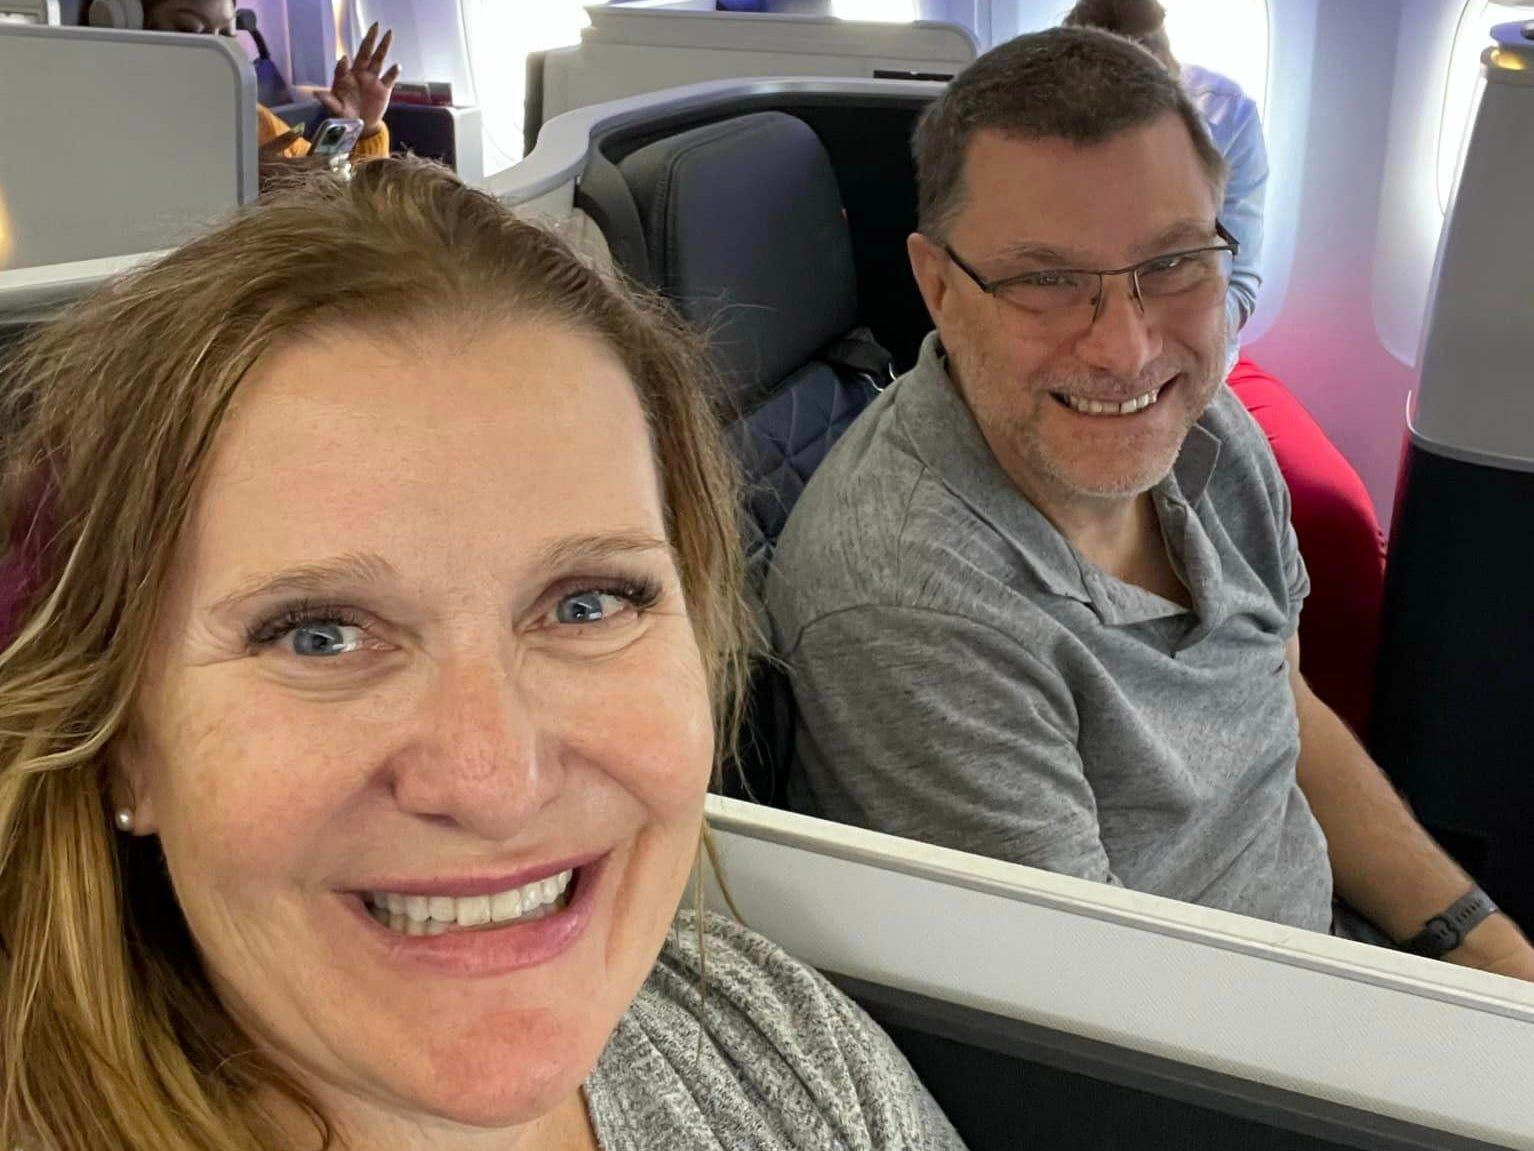 Jill and her husband use her airline points to upgrade on flights